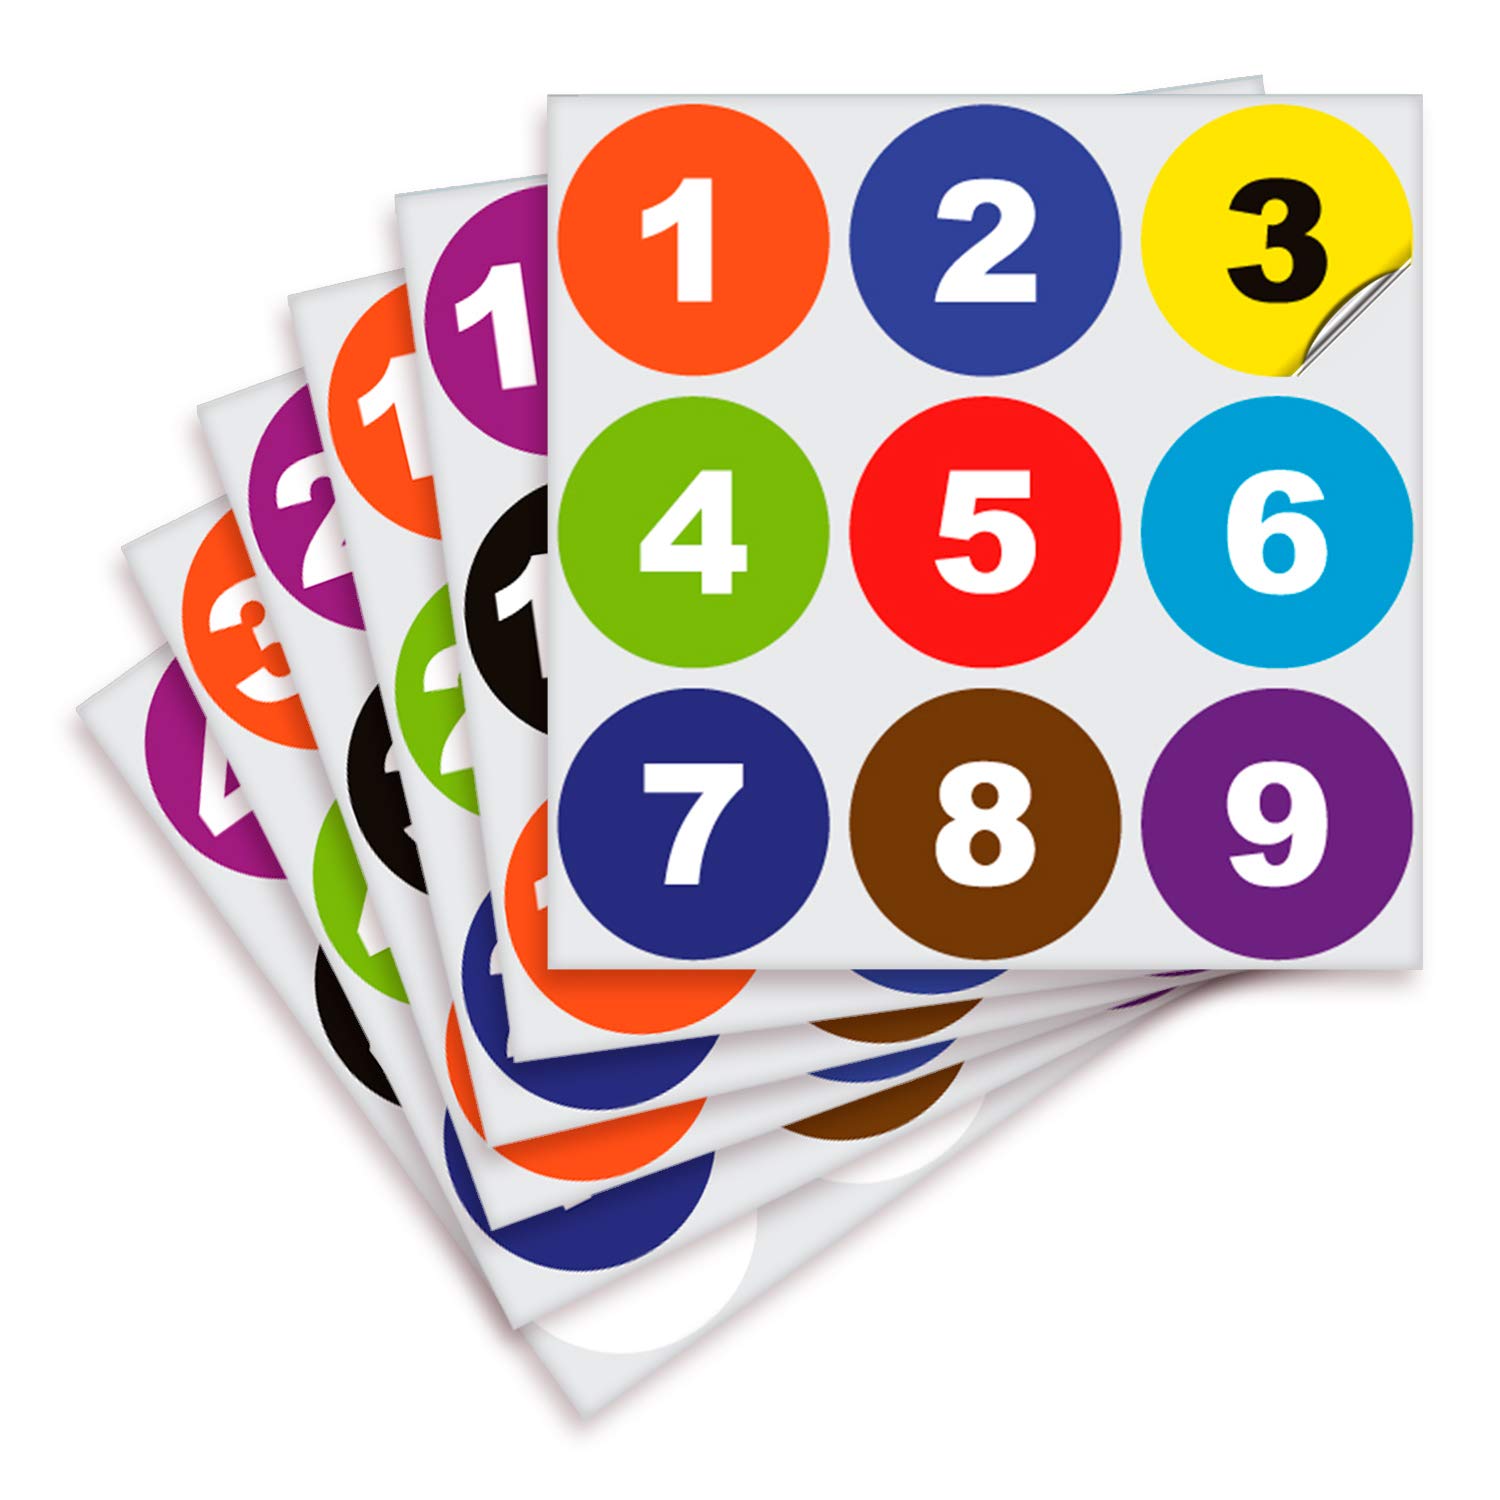 iSYFIX Multicolor consecutive Number Stickers - 1 to 50, 2-inch, 1 Set - Vinyl Self Adhesive Premium Decal, Ideal for In